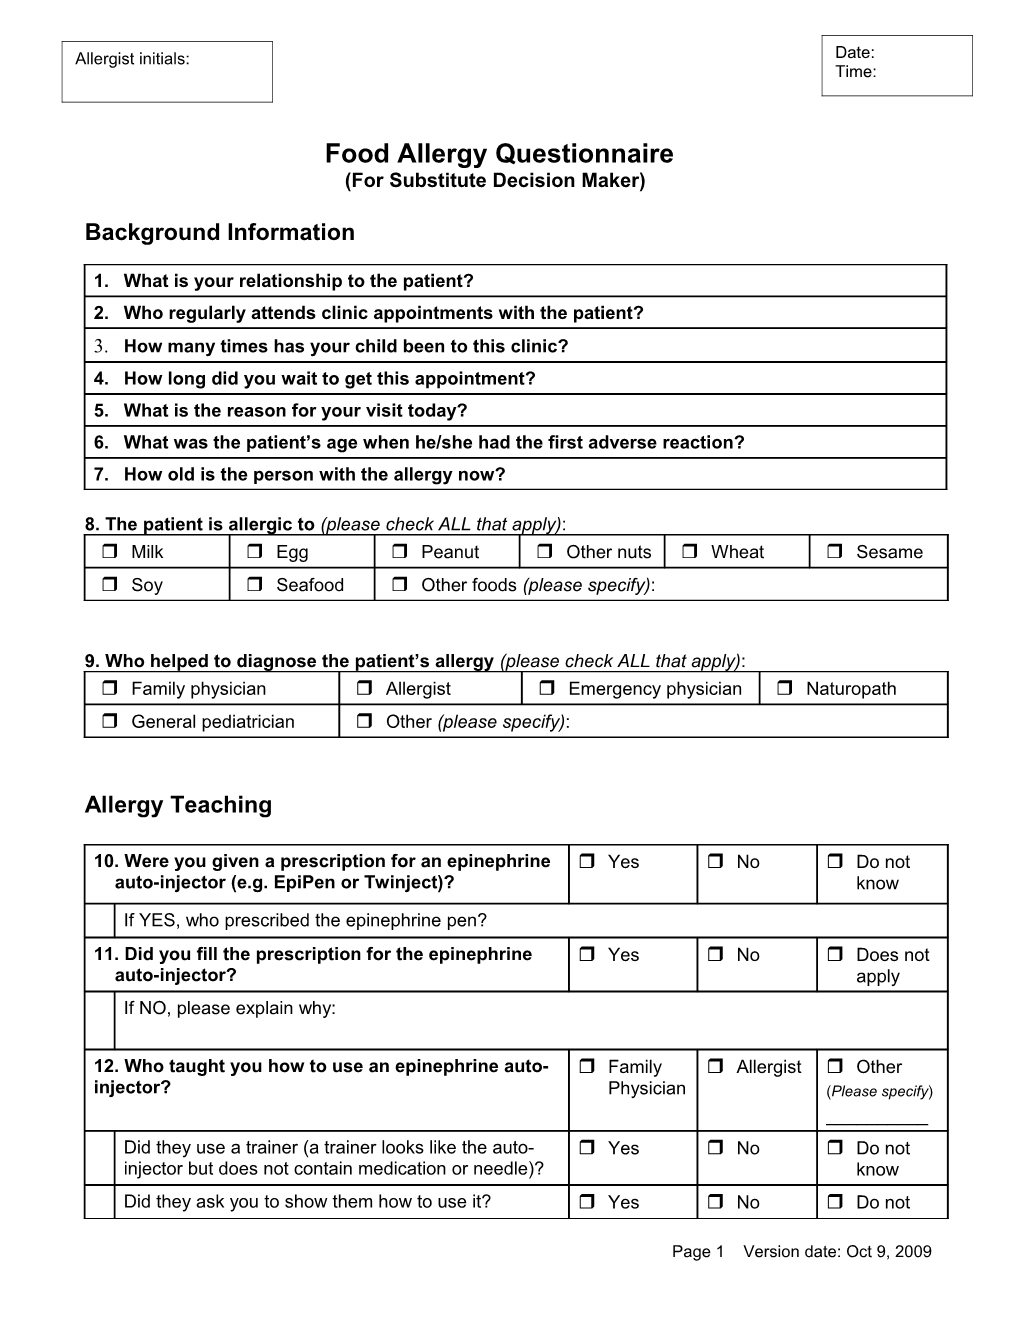 Food Allergy Questionnaire